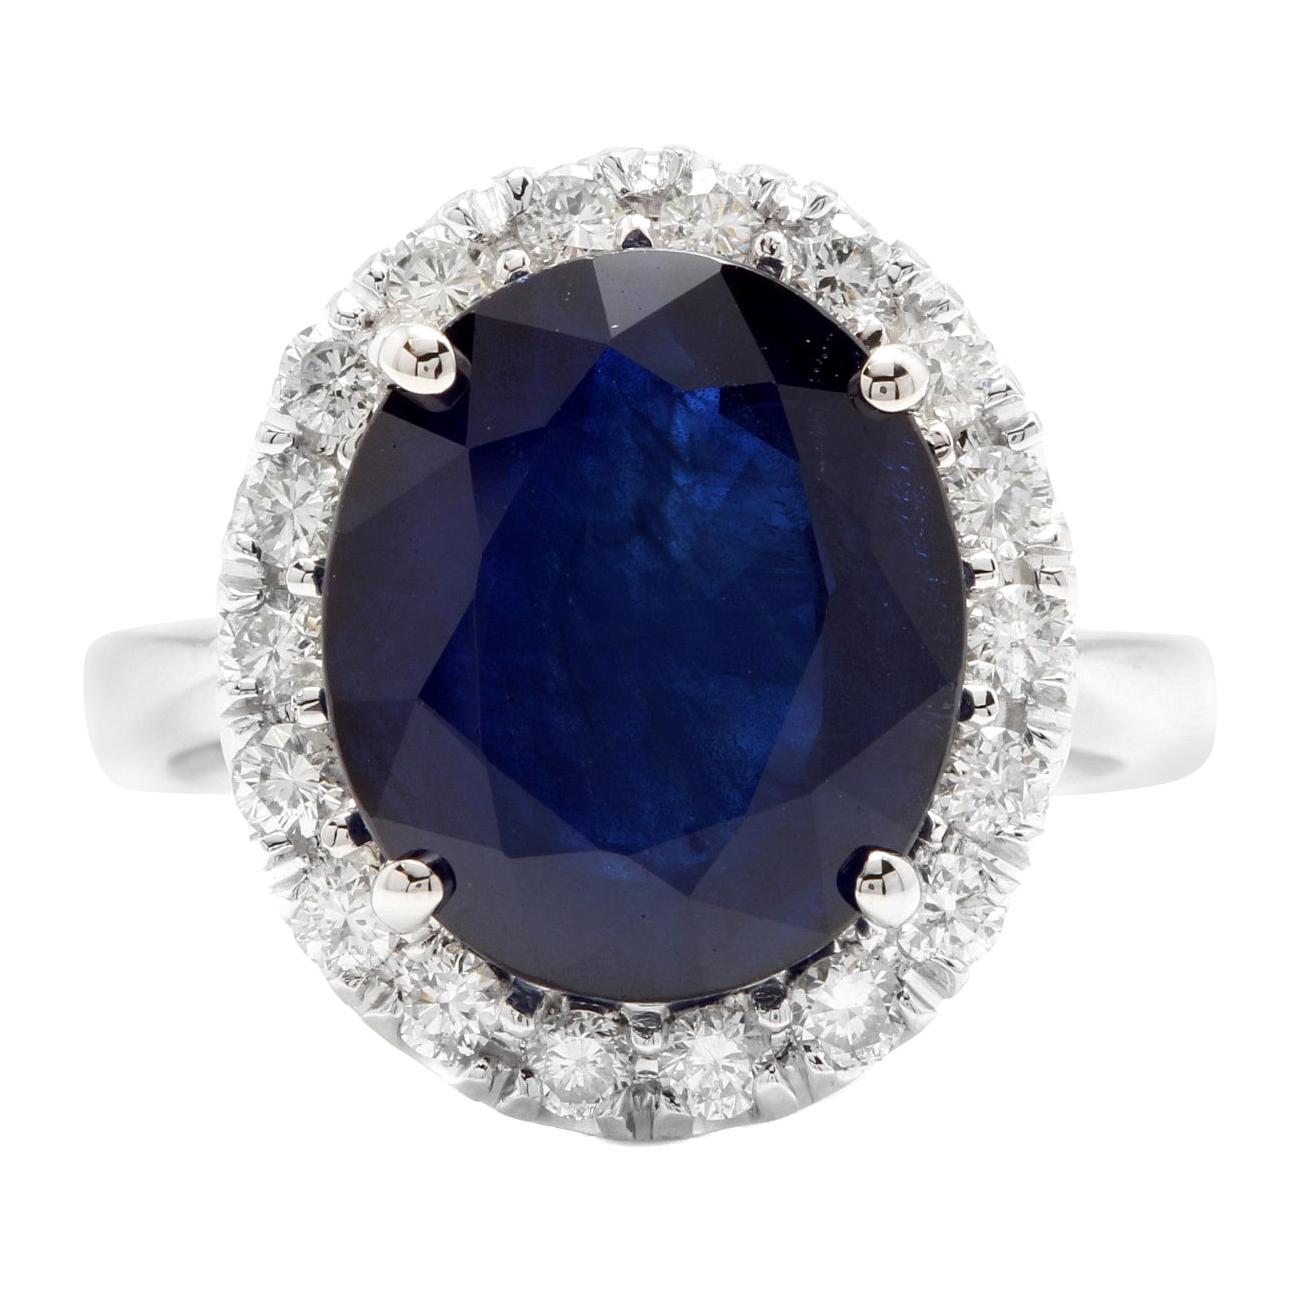 11.15ct Natural Blue Sapphire & Diamond 14k Solid White Gold Ring